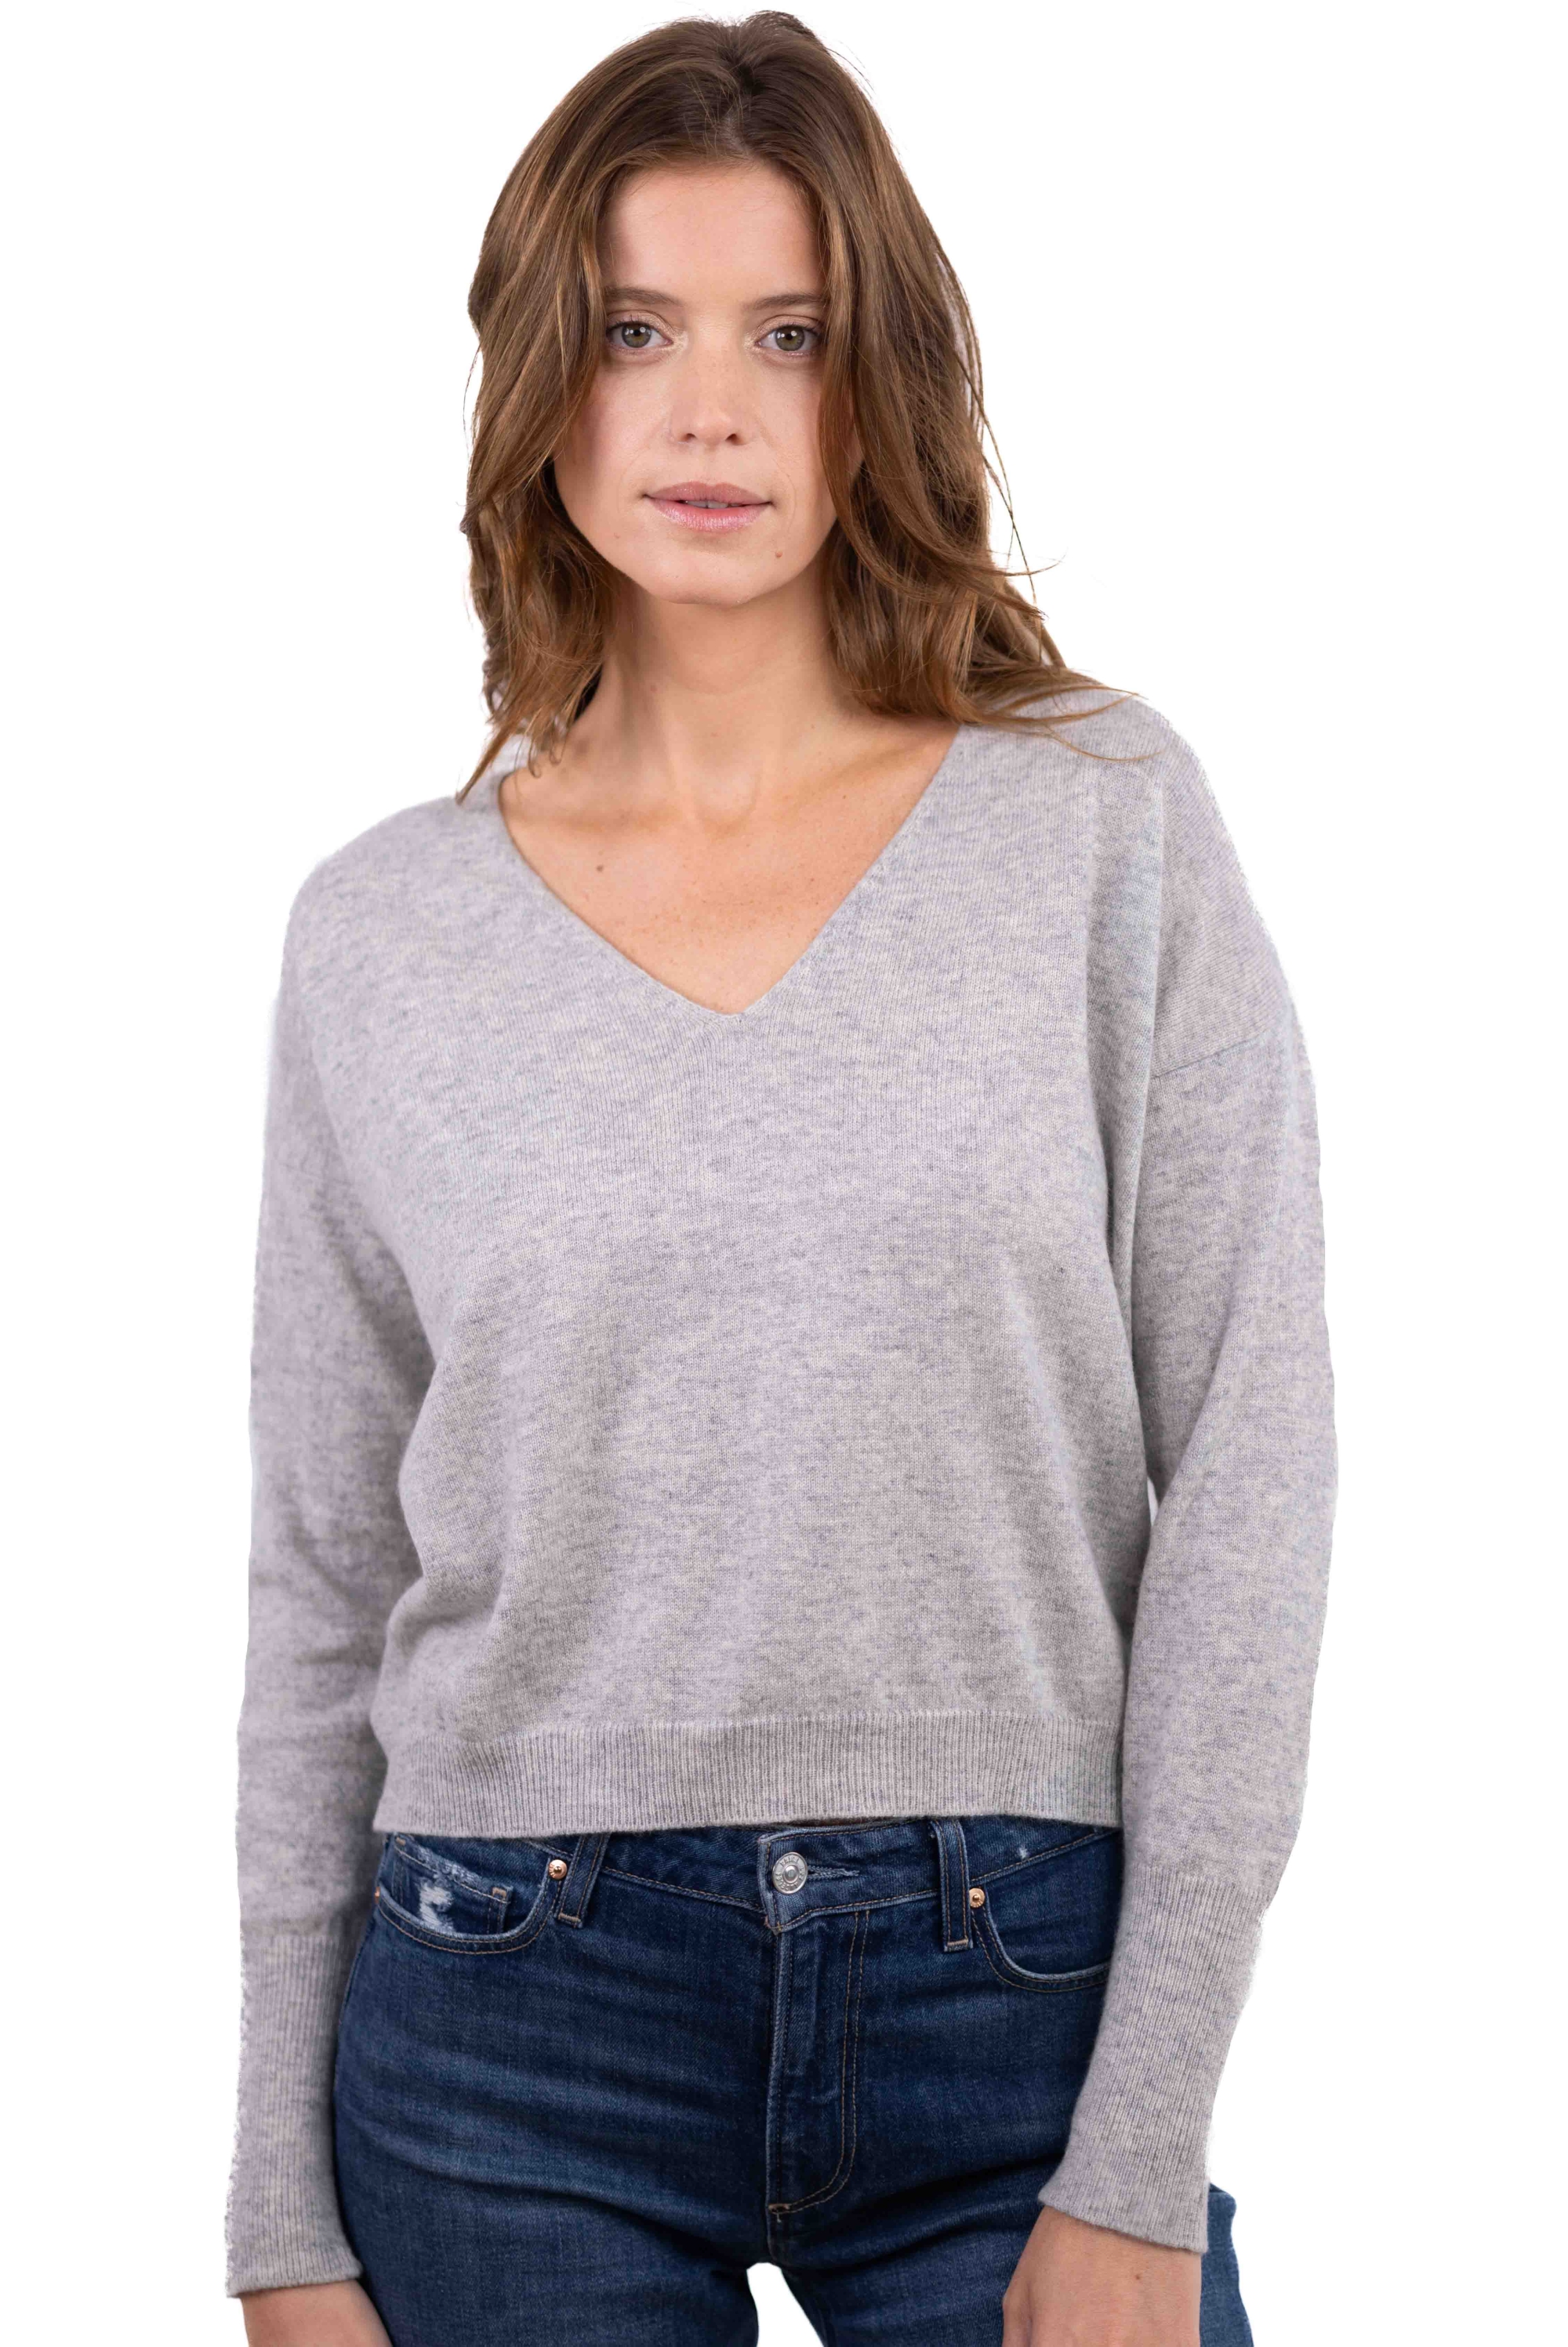 Cachemire pull femme col v urcy flanelle chine s